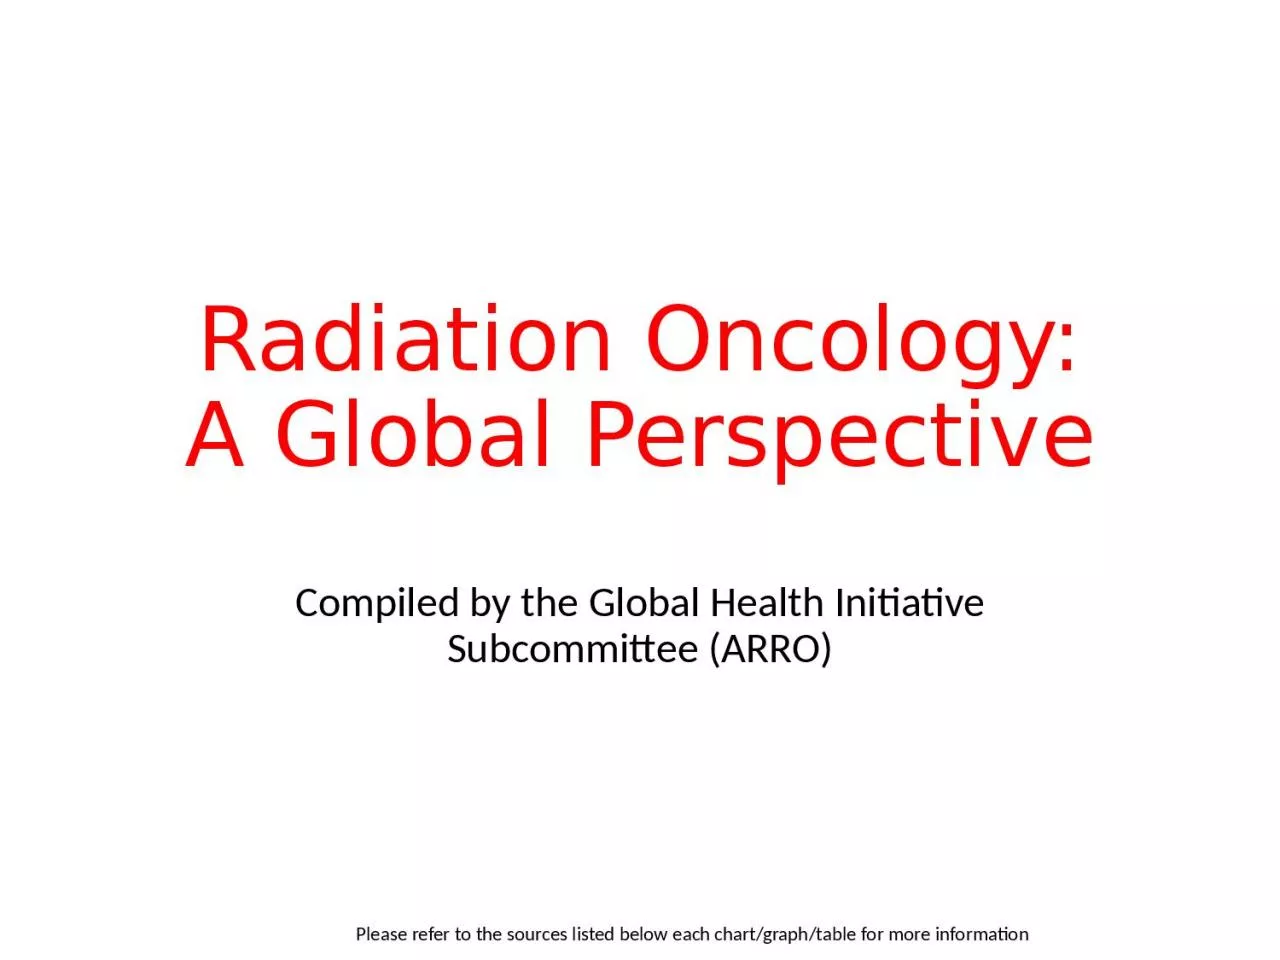 Radiation Oncology: A Global Perspective